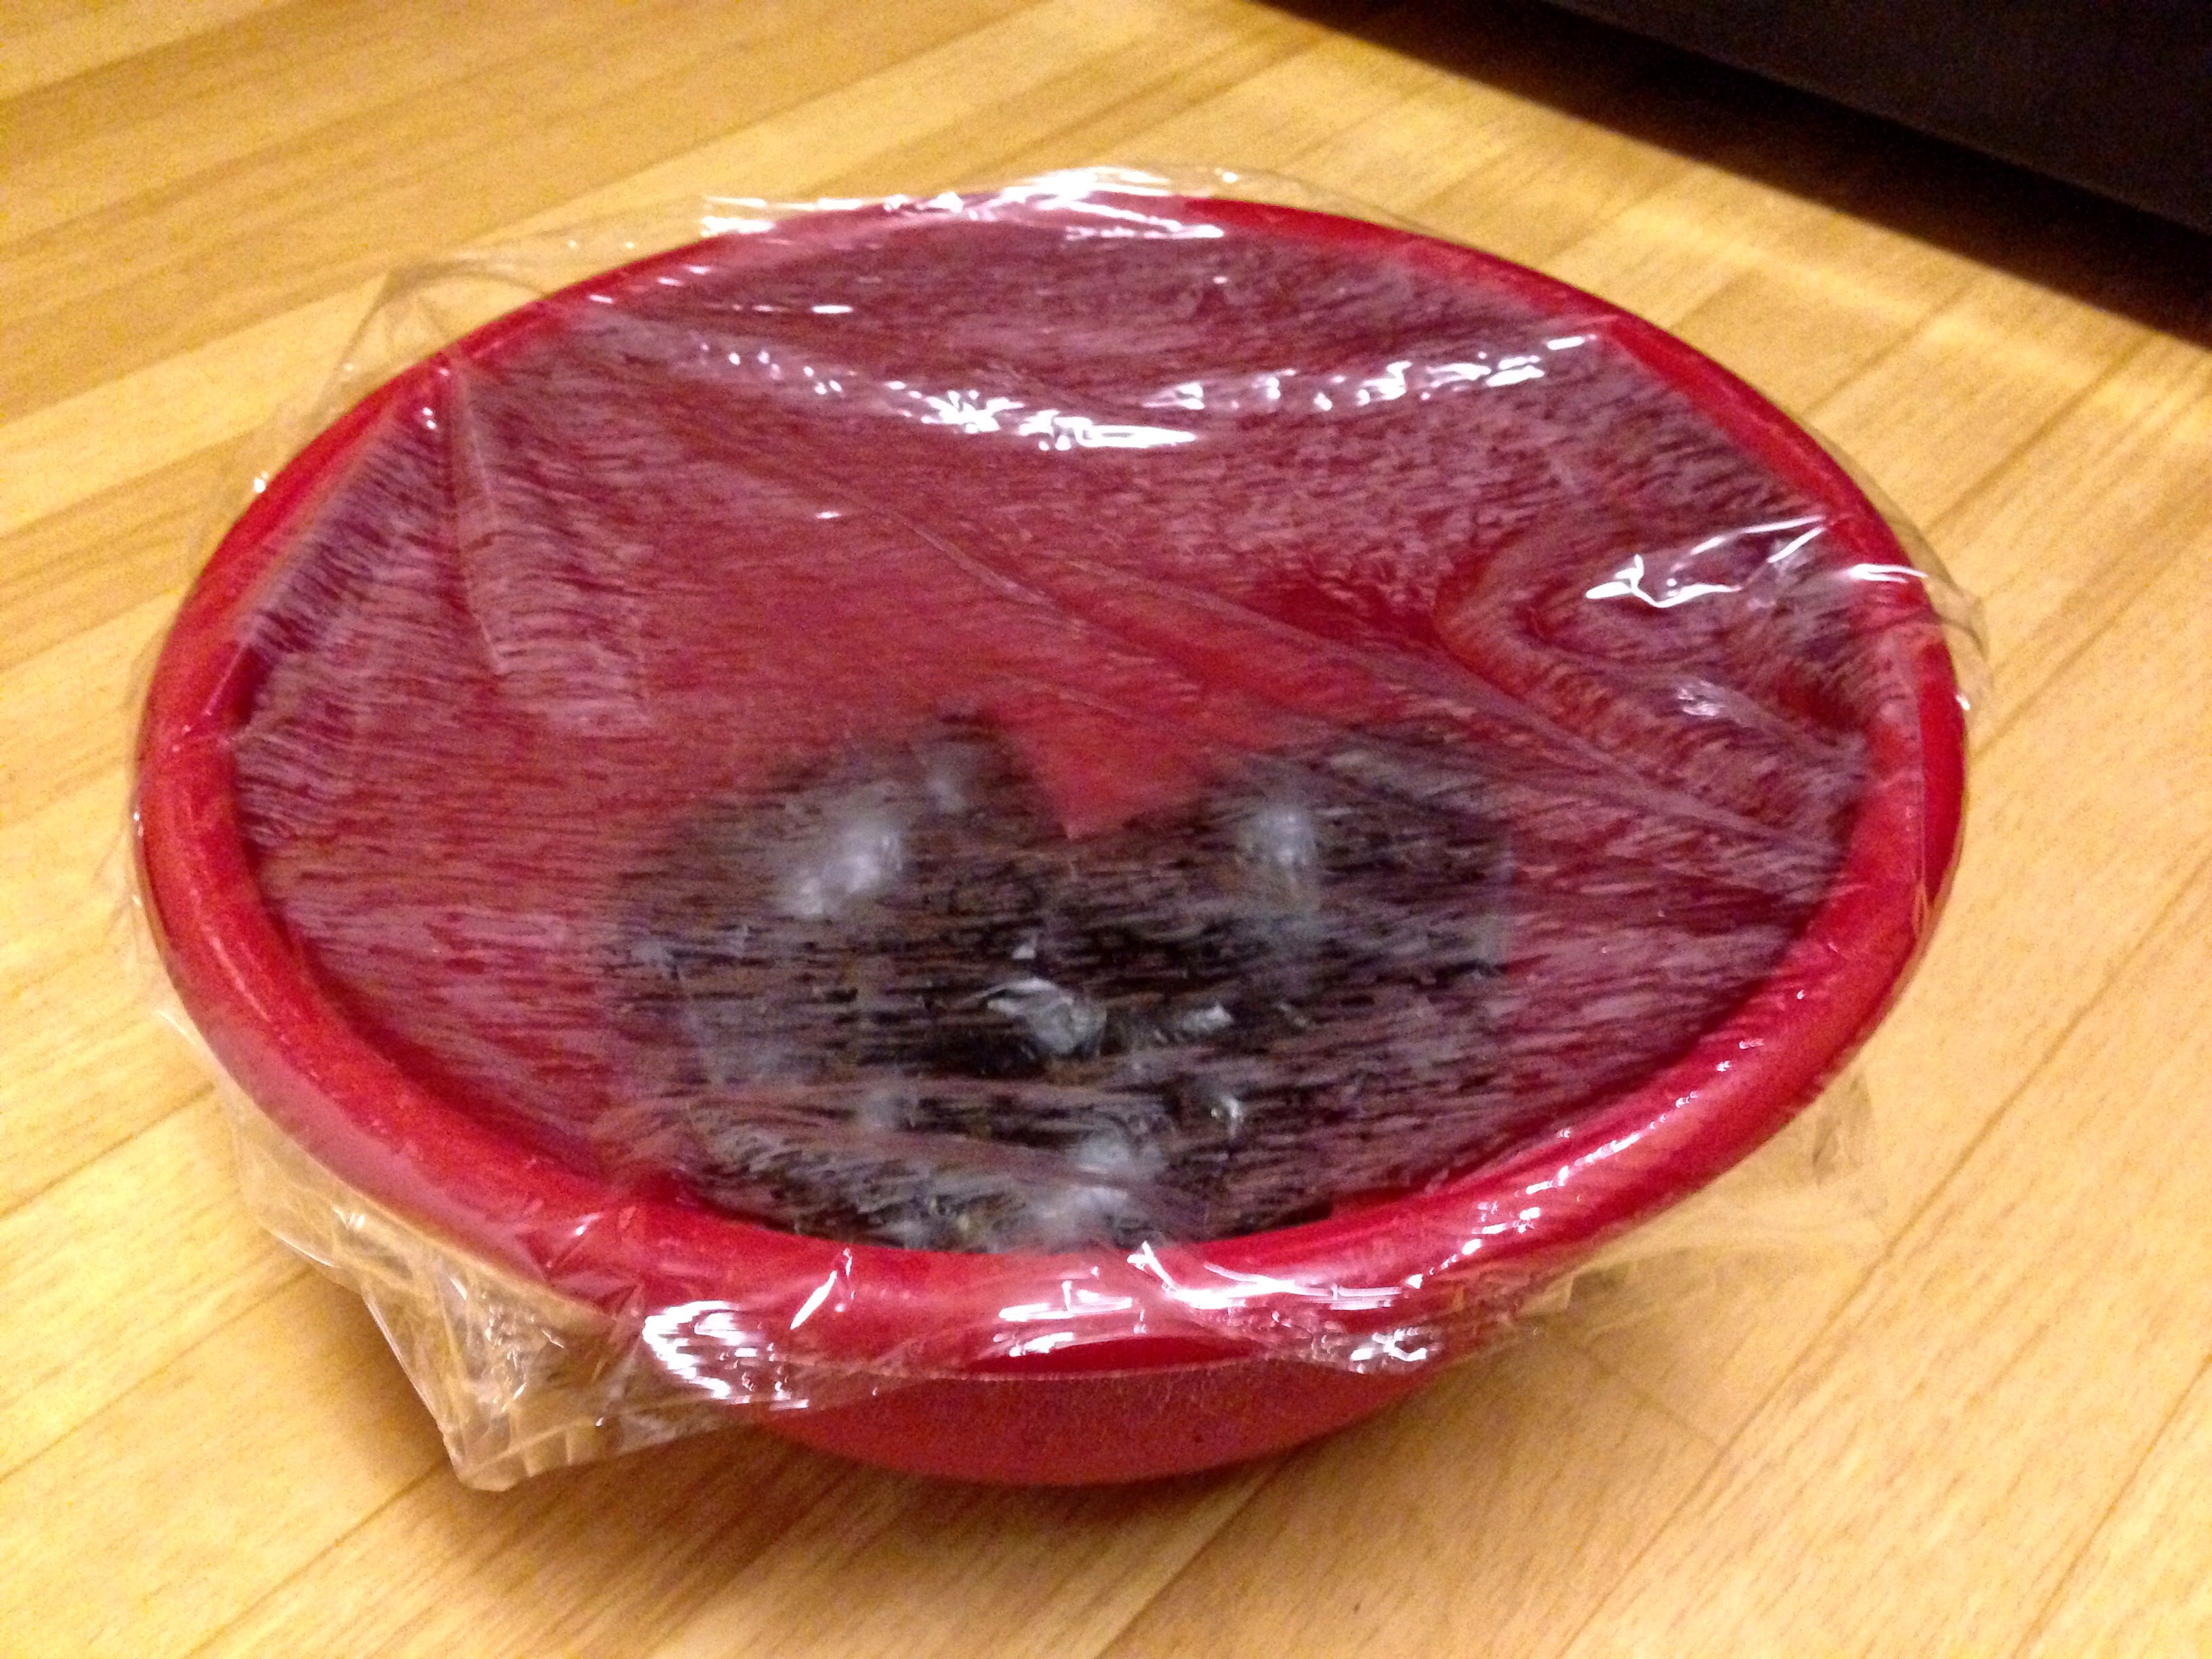 Step Three: Place blackened peppers in a covered bowl or brown paper bag for 15 minutes.